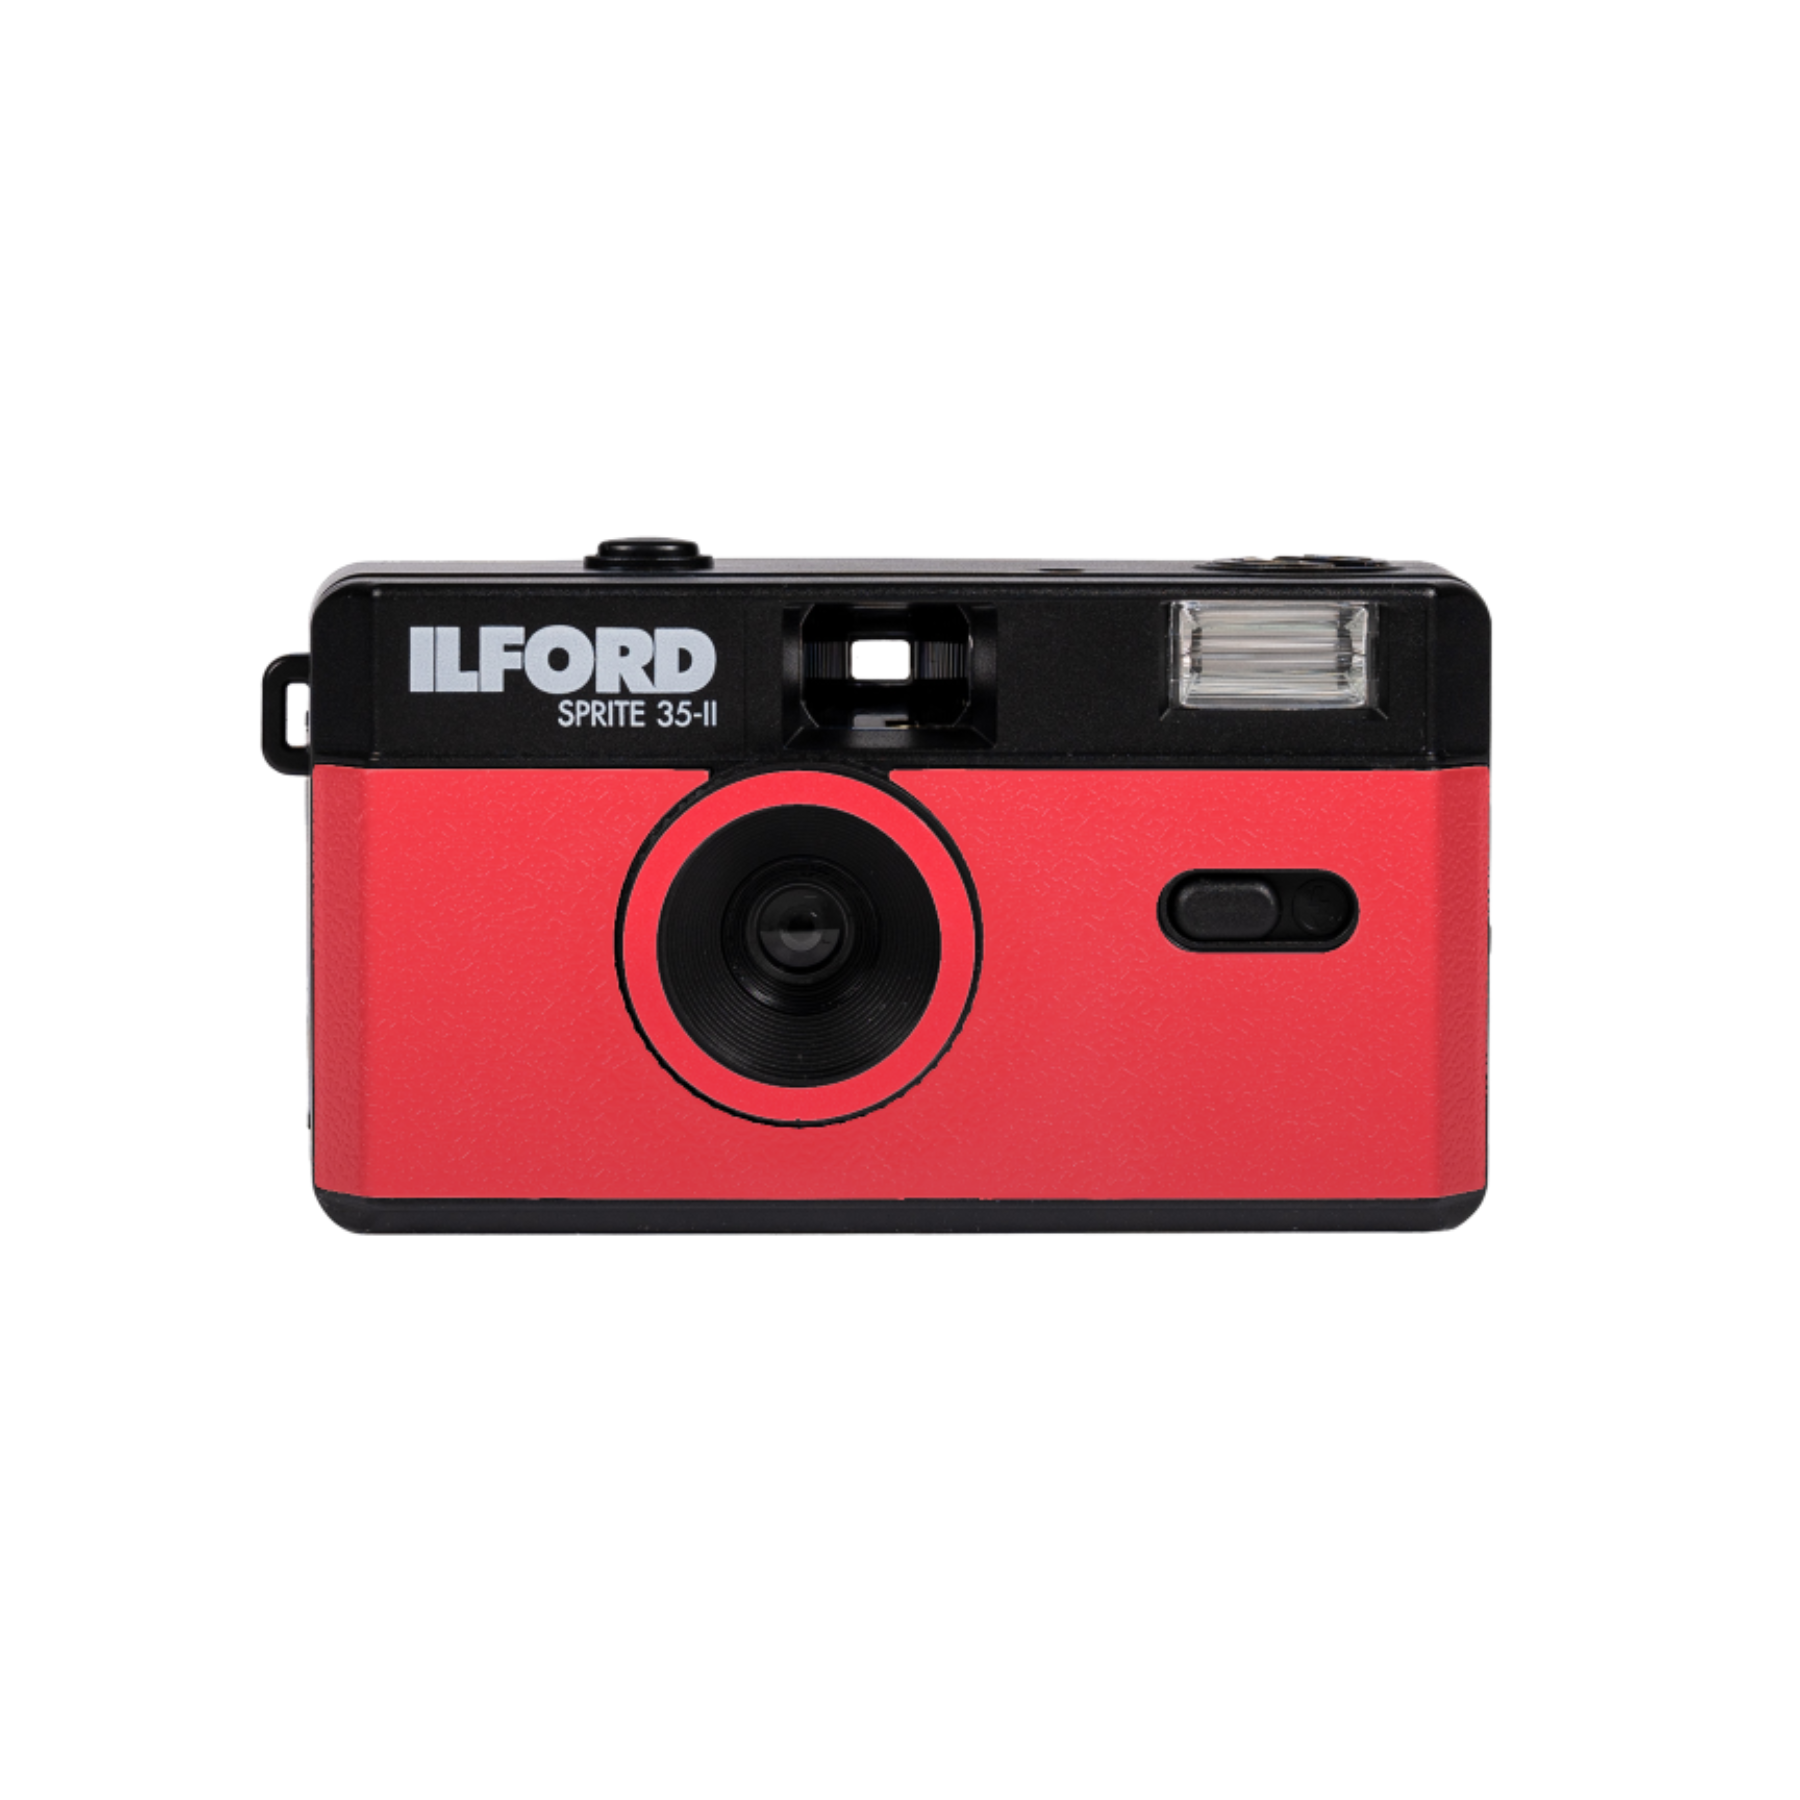 Buy ILFORD SPRITE 35-II reusable film camera - black & red at Topic Store